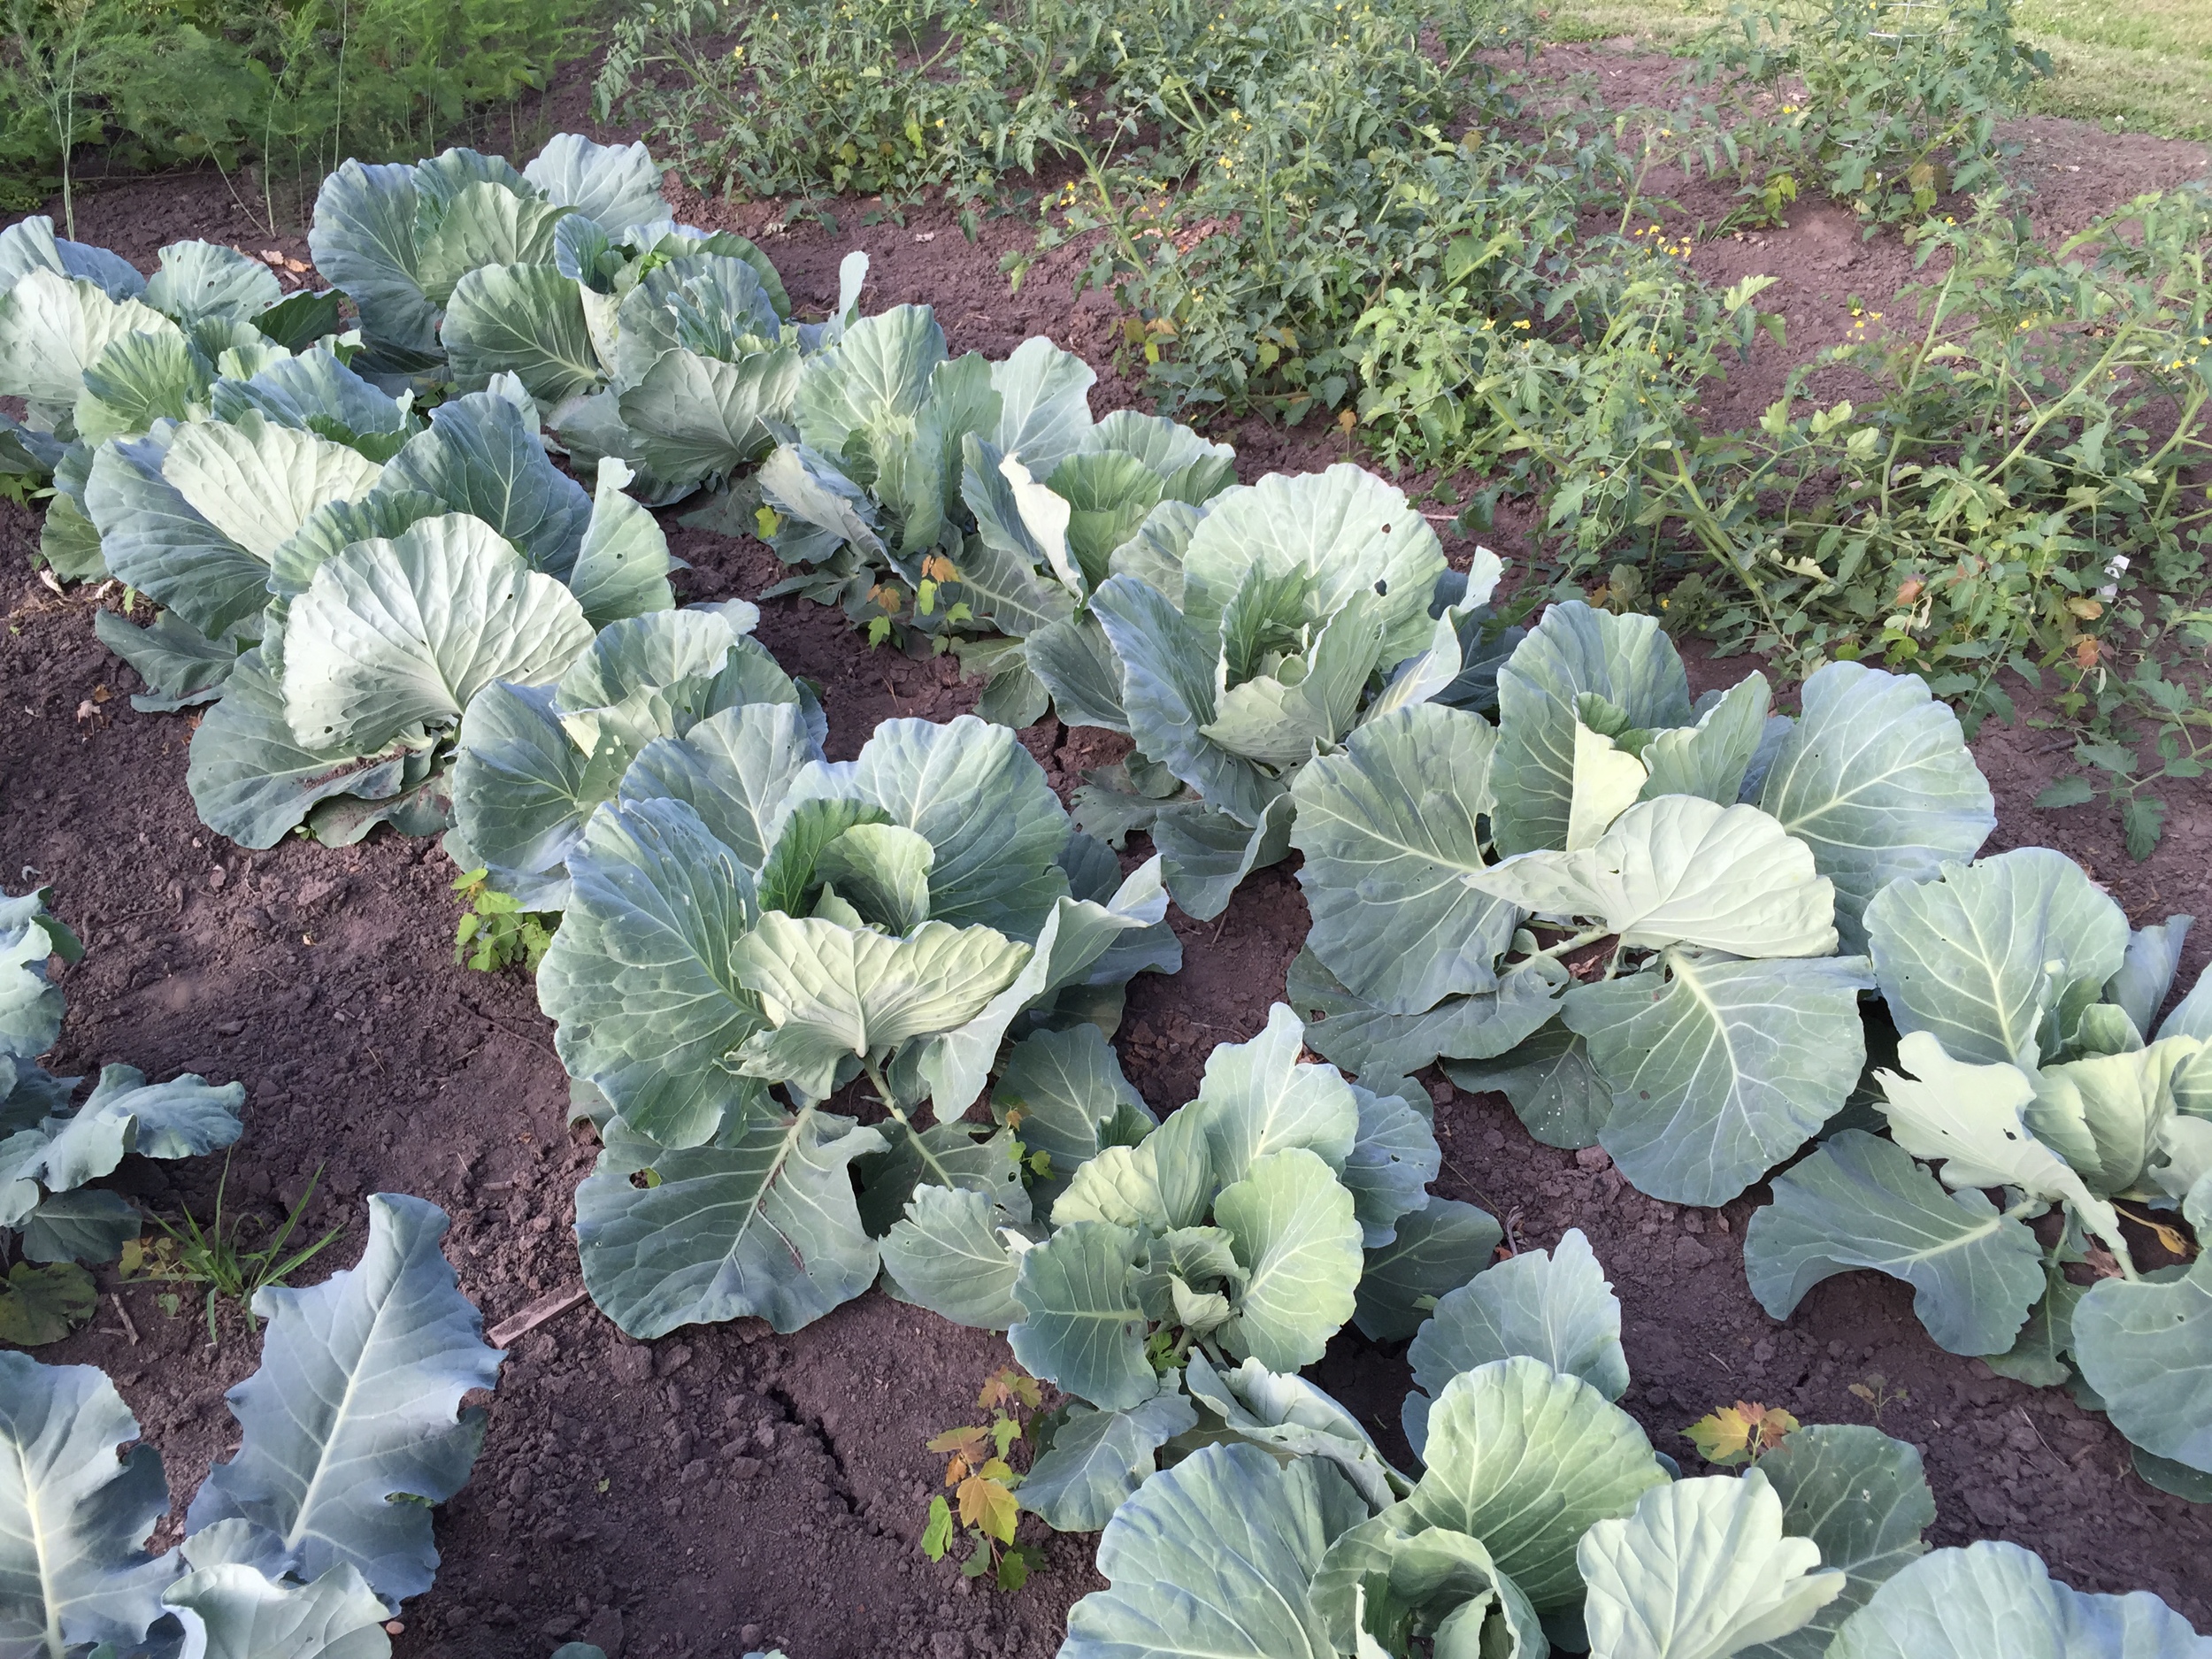  Cabbages looking good. 